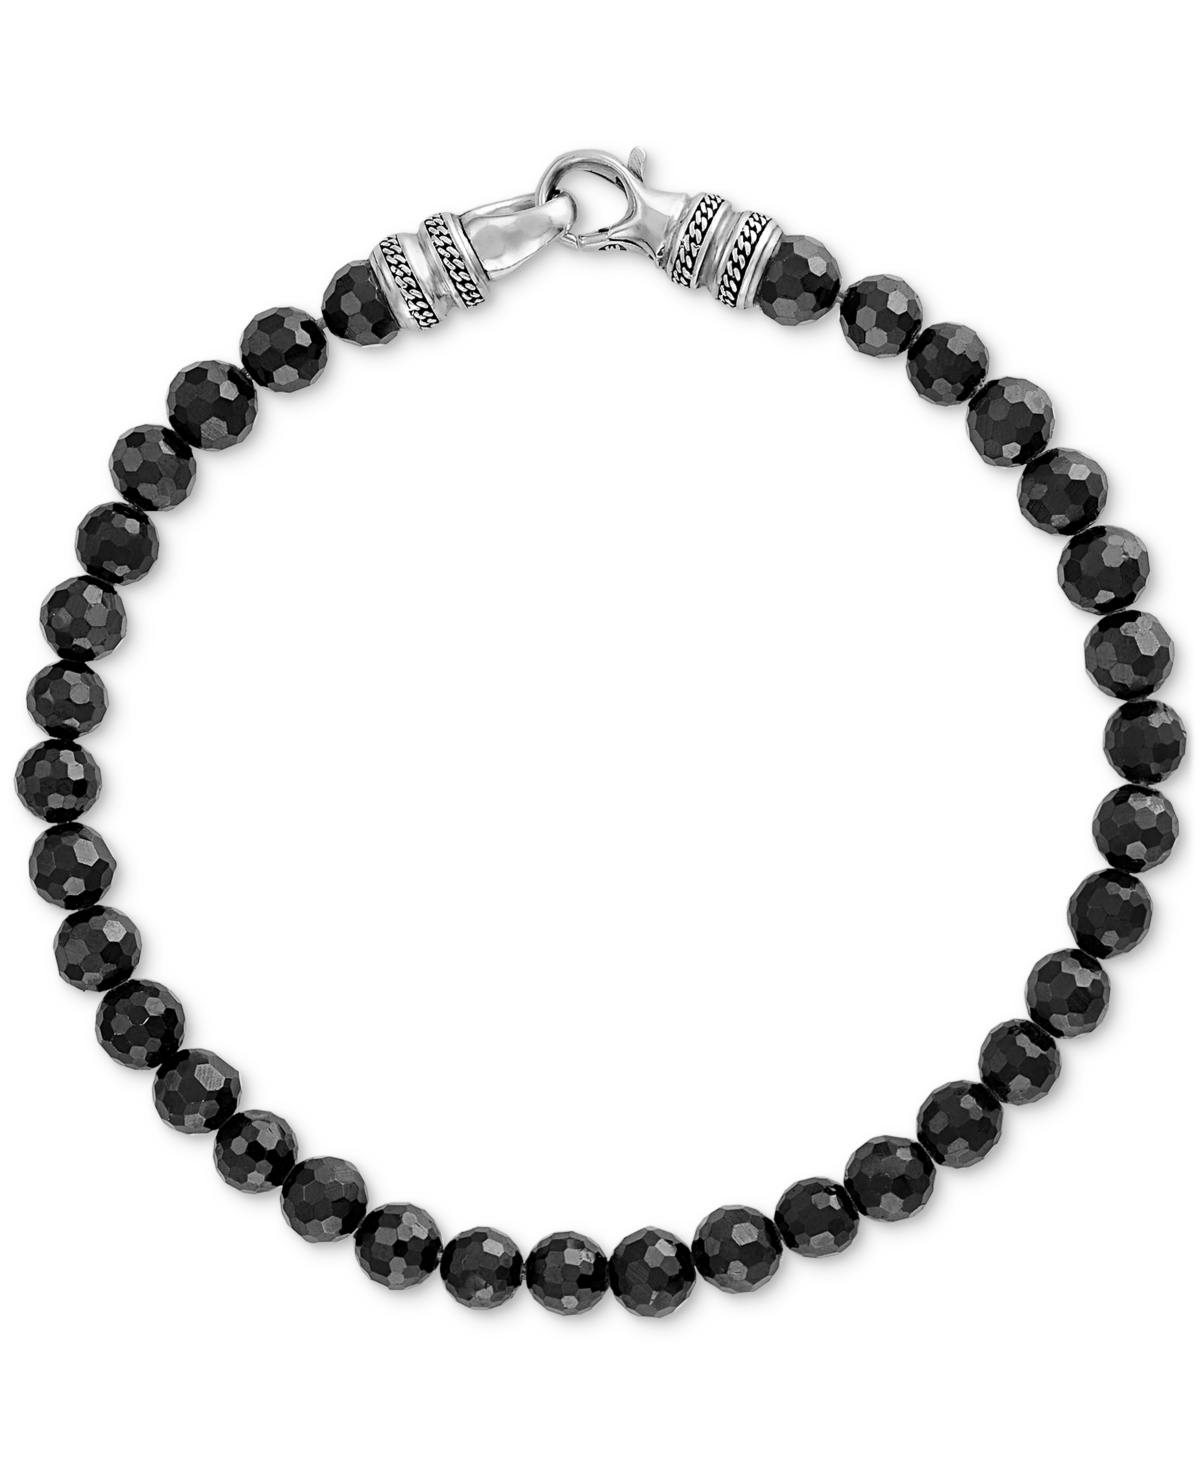 Shop Esquire Men's Jewelry Black Spinel Beaded Bracelet In Sterling Silver, Created For Macy's